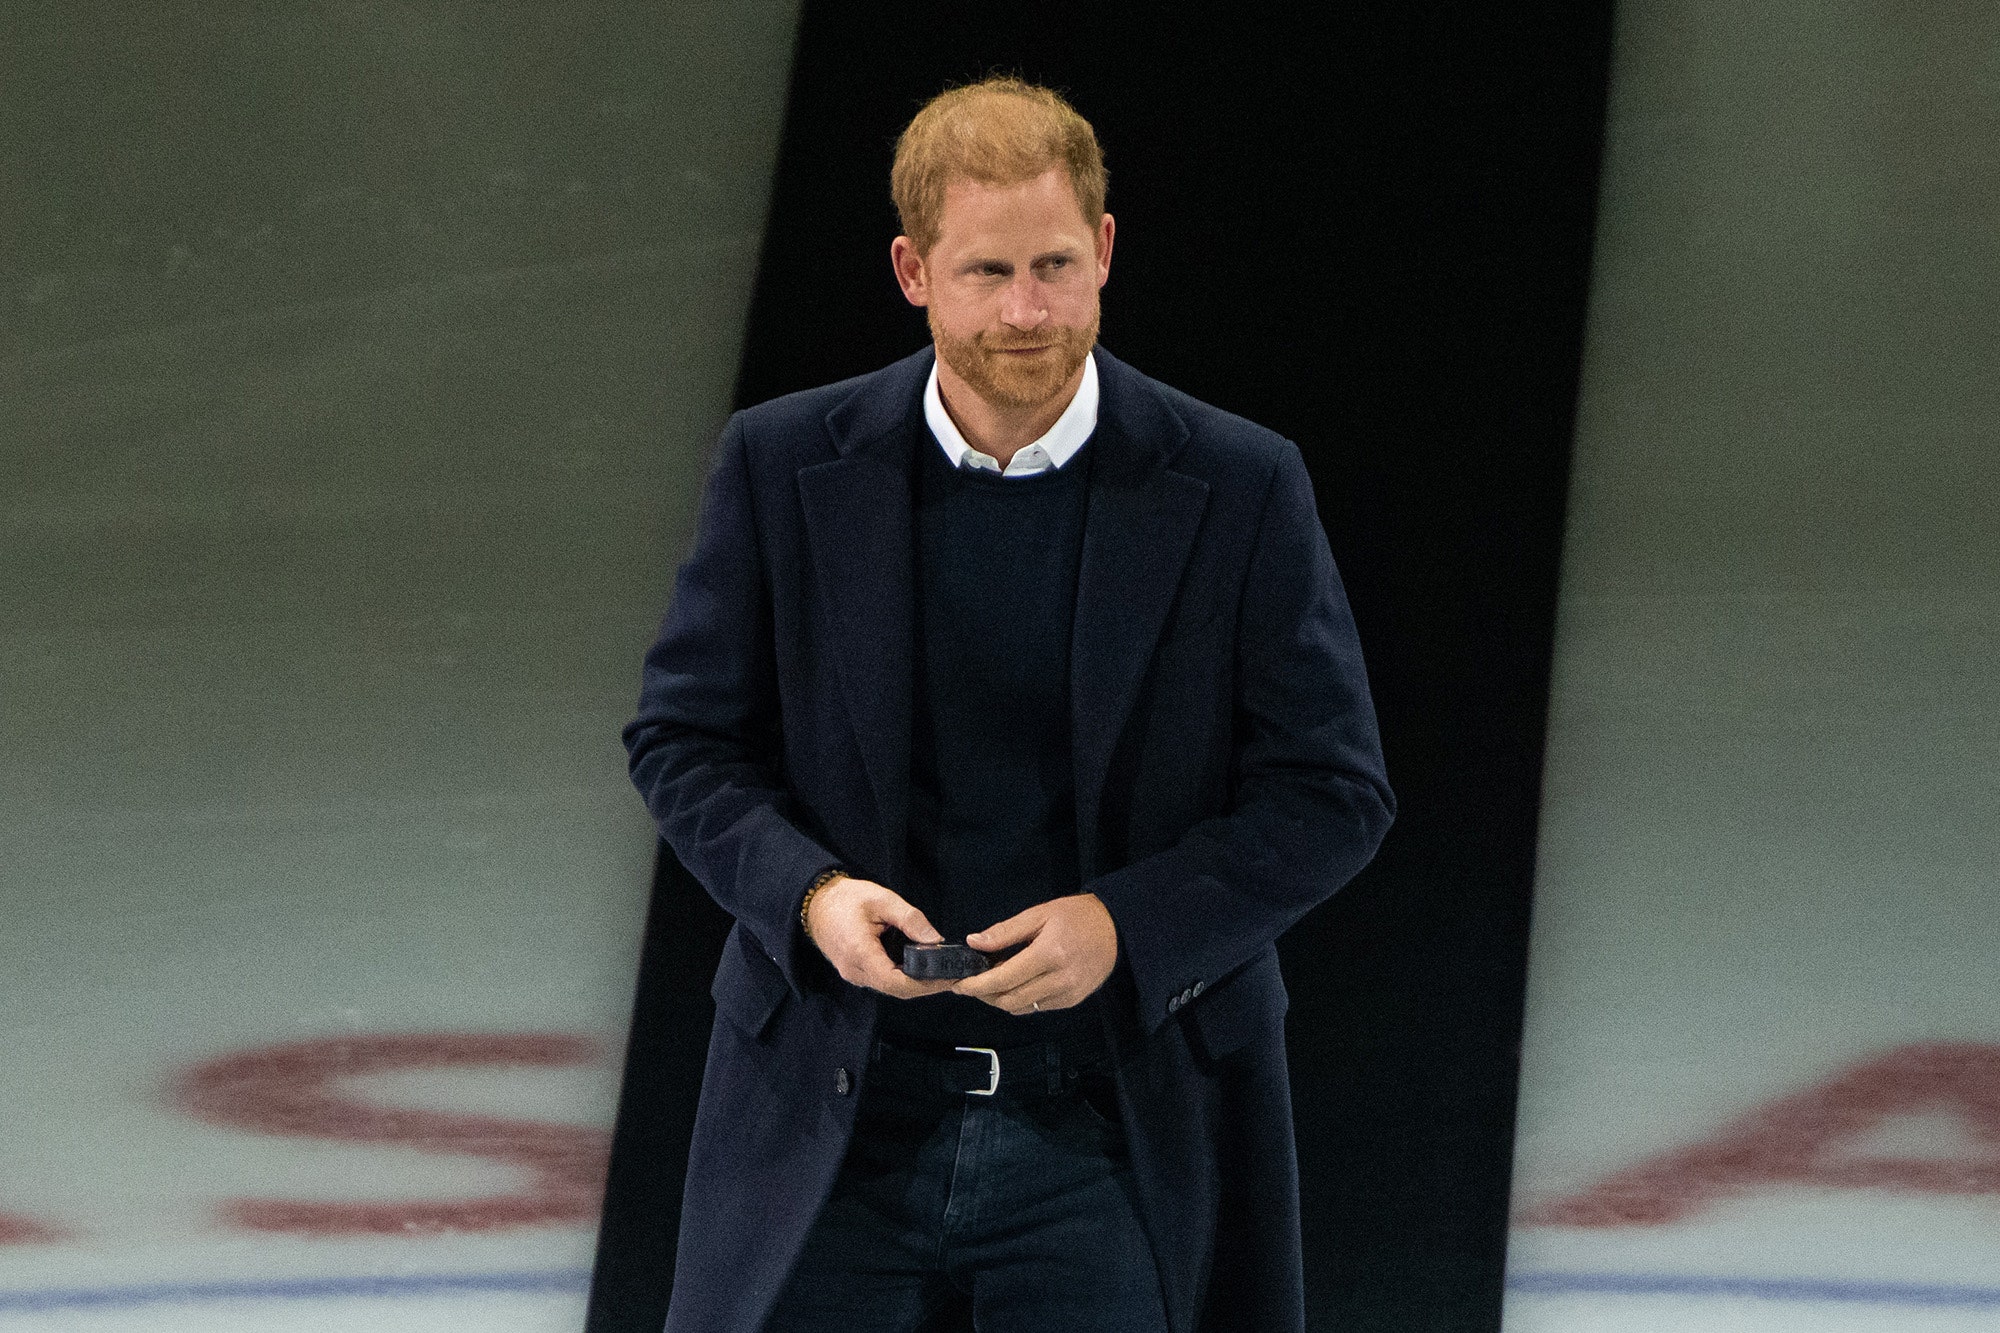 Why Prince Harry Returning to Royal Duties Is “Unthinkable”